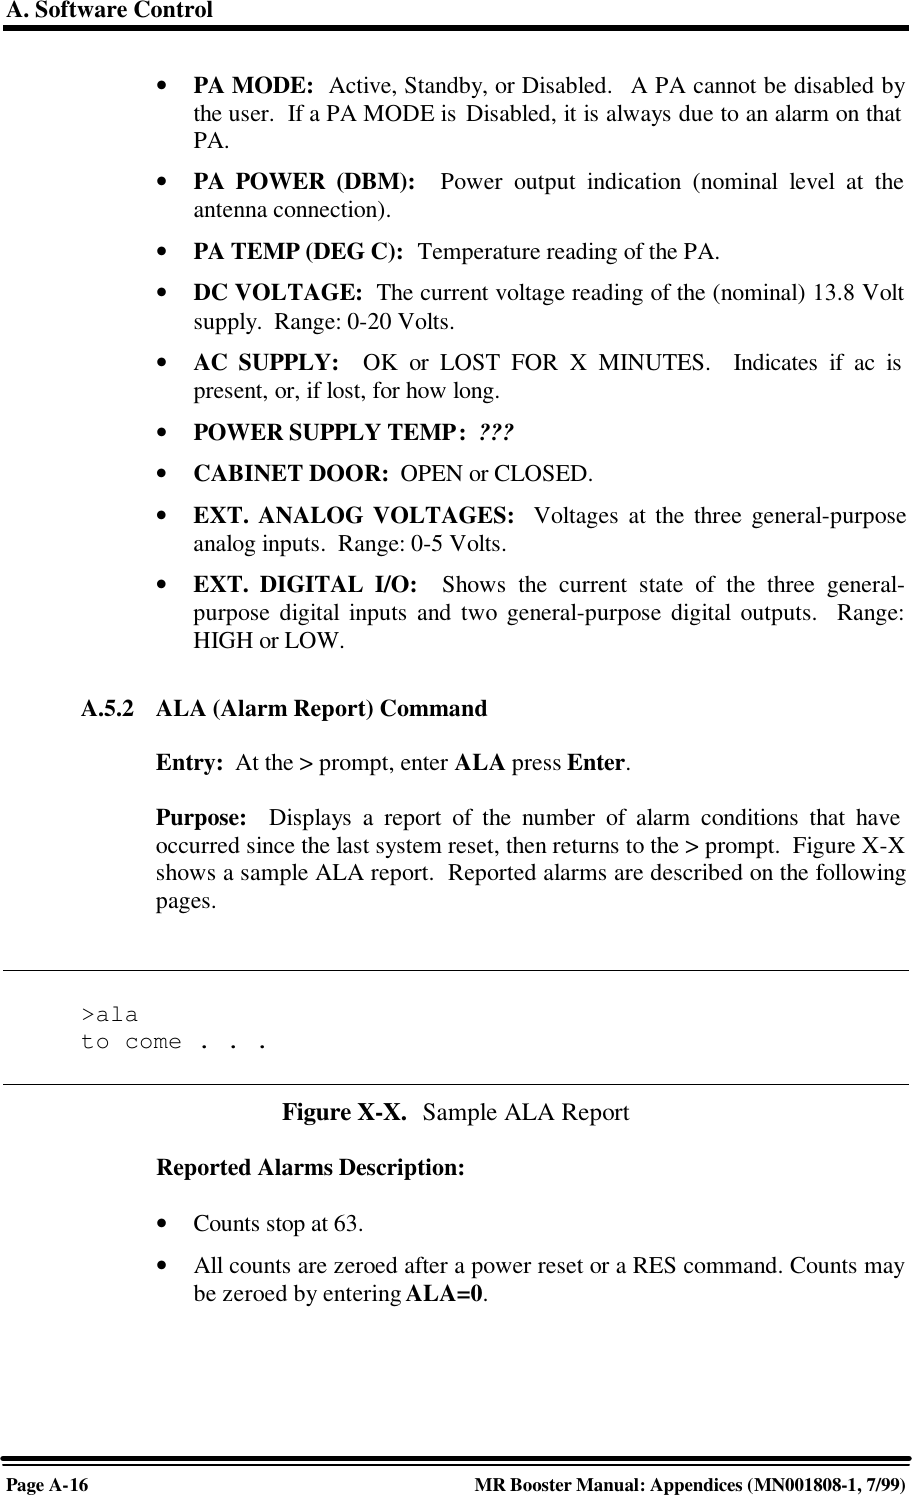 A. Software ControlPage A-16 MR Booster Manual: Appendices (MN001808-1, 7/99)• PA MODE:  Active, Standby, or Disabled.   A PA cannot be disabled bythe user.  If a PA MODE is Disabled, it is always due to an alarm on thatPA.• PA POWER (DBM):  Power output indication (nominal level at theantenna connection).• PA TEMP (DEG C):  Temperature reading of the PA.• DC VOLTAGE:  The current voltage reading of the (nominal) 13.8 Voltsupply.  Range: 0-20 Volts.• AC SUPPLY:  OK or LOST FOR X MINUTES.  Indicates if ac ispresent, or, if lost, for how long.• POWER SUPPLY TEMP:  ???• CABINET DOOR:  OPEN or CLOSED.• EXT. ANALOG VOLTAGES:  Voltages at the three general-purposeanalog inputs.  Range: 0-5 Volts.• EXT. DIGITAL I/O:  Shows the current state of the three general-purpose digital inputs and two general-purpose digital outputs.  Range:HIGH or LOW.A.5.2 ALA (Alarm Report) CommandEntry:  At the &gt; prompt, enter ALA press Enter.Purpose:  Displays a report of the number of alarm conditions that haveoccurred since the last system reset, then returns to the &gt; prompt.  Figure X-Xshows a sample ALA report.  Reported alarms are described on the followingpages.&gt;alato come . . .Figure X-X.  Sample ALA ReportReported Alarms Description:• Counts stop at 63.• All counts are zeroed after a power reset or a RES command. Counts maybe zeroed by entering ALA=0.